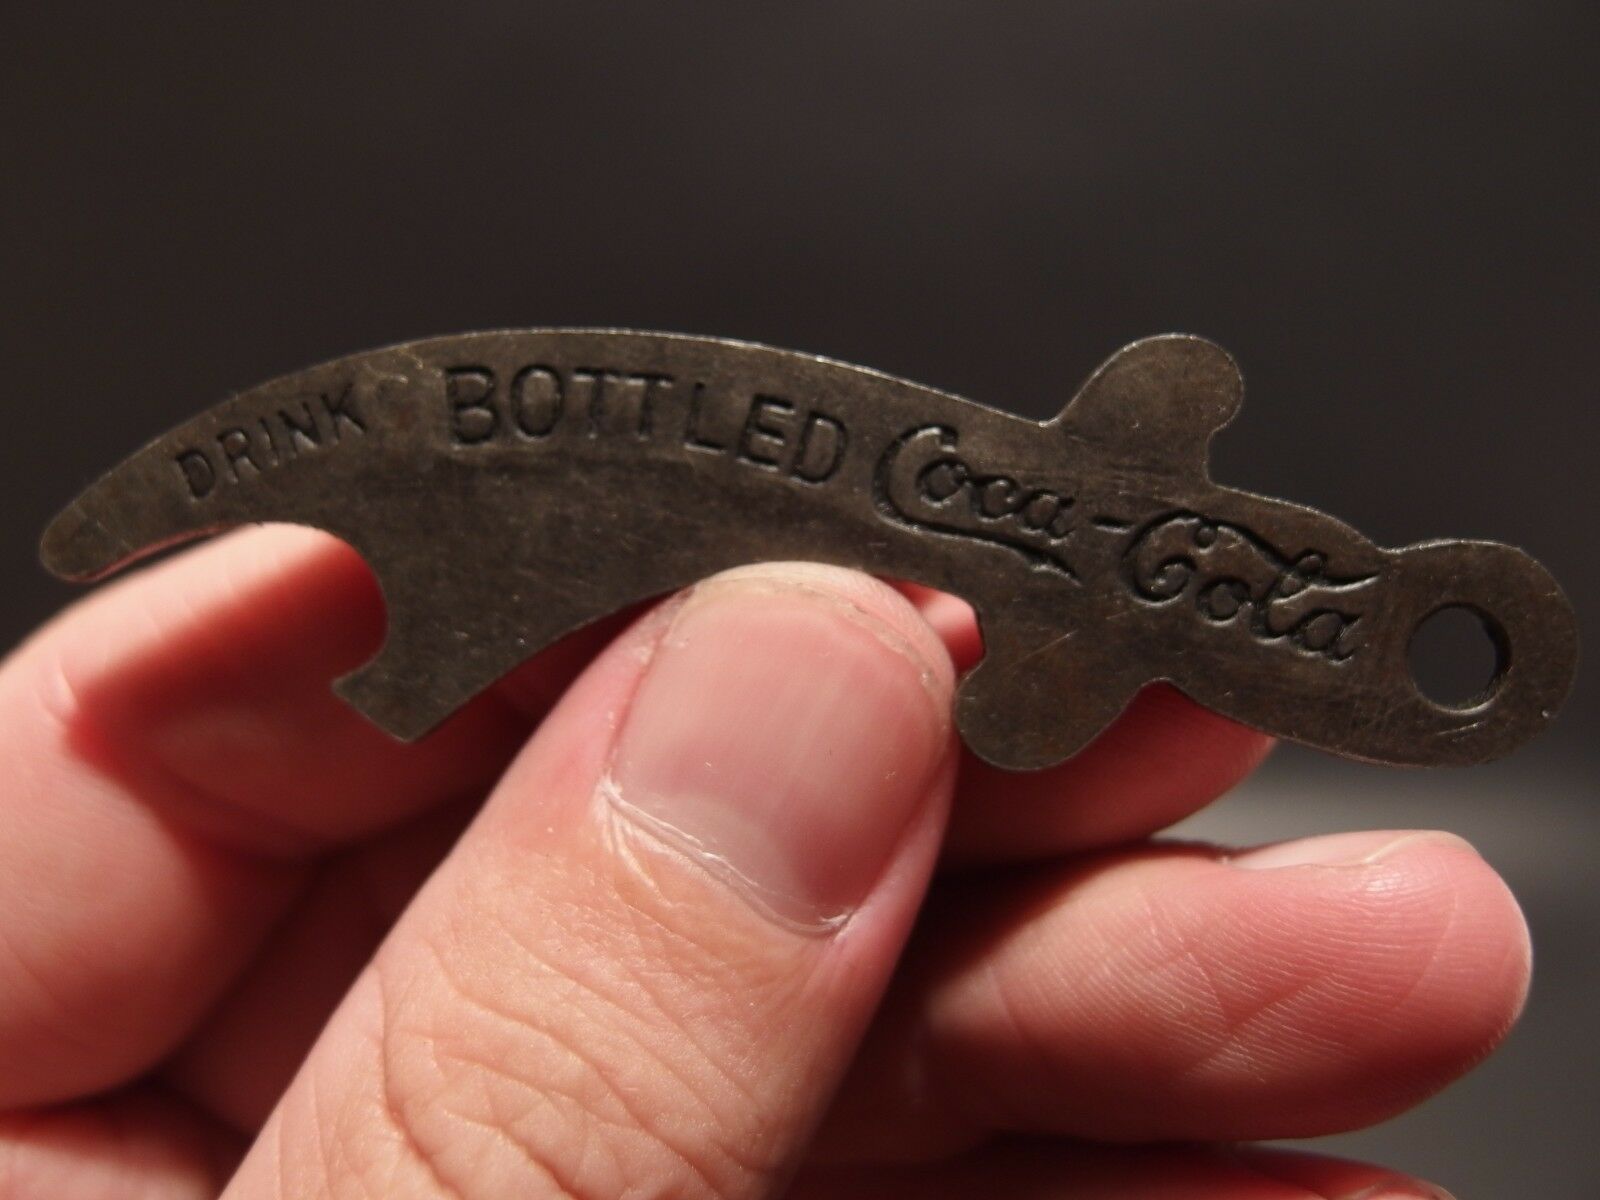 Vintage Style Coca Cola Bottle Opener - Early Home Decor